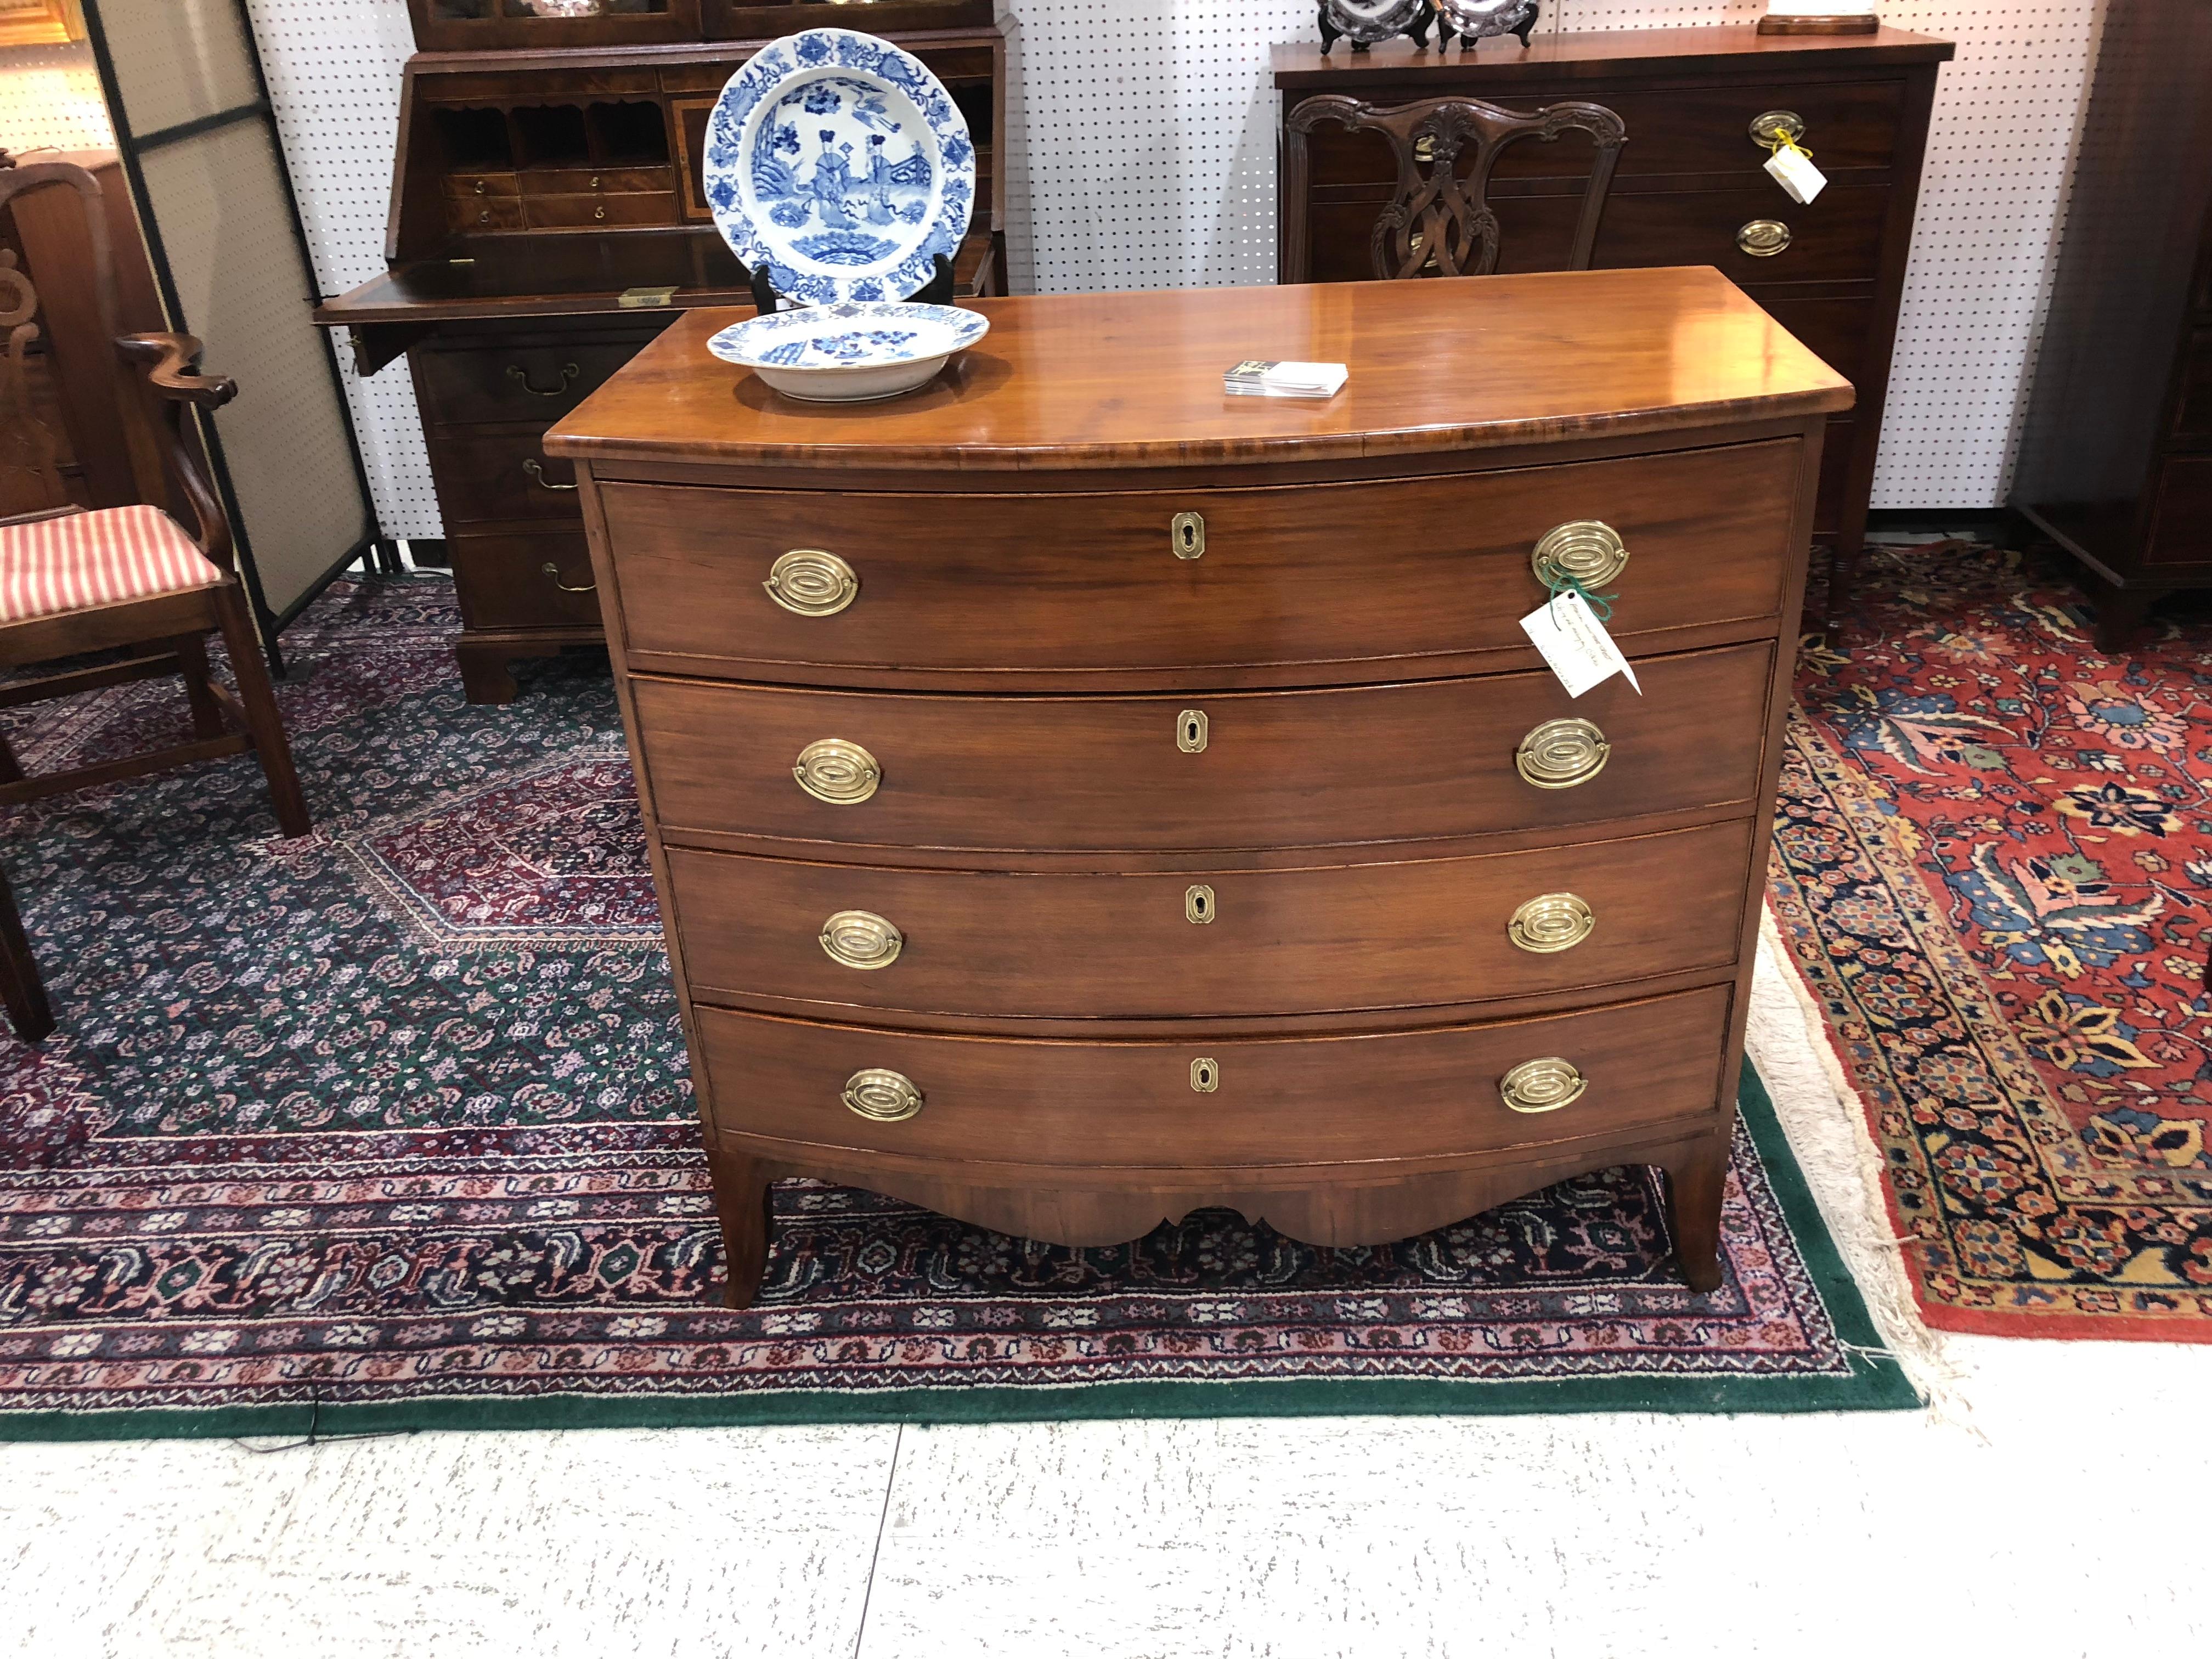 American federal bow front chest, circa 1820, cherry and mahogany, excellent light color, beautiful skirt and tall feet, drawers work well, period brass ovals, beautiful finish, nice size, not too tall, an elegant chest.